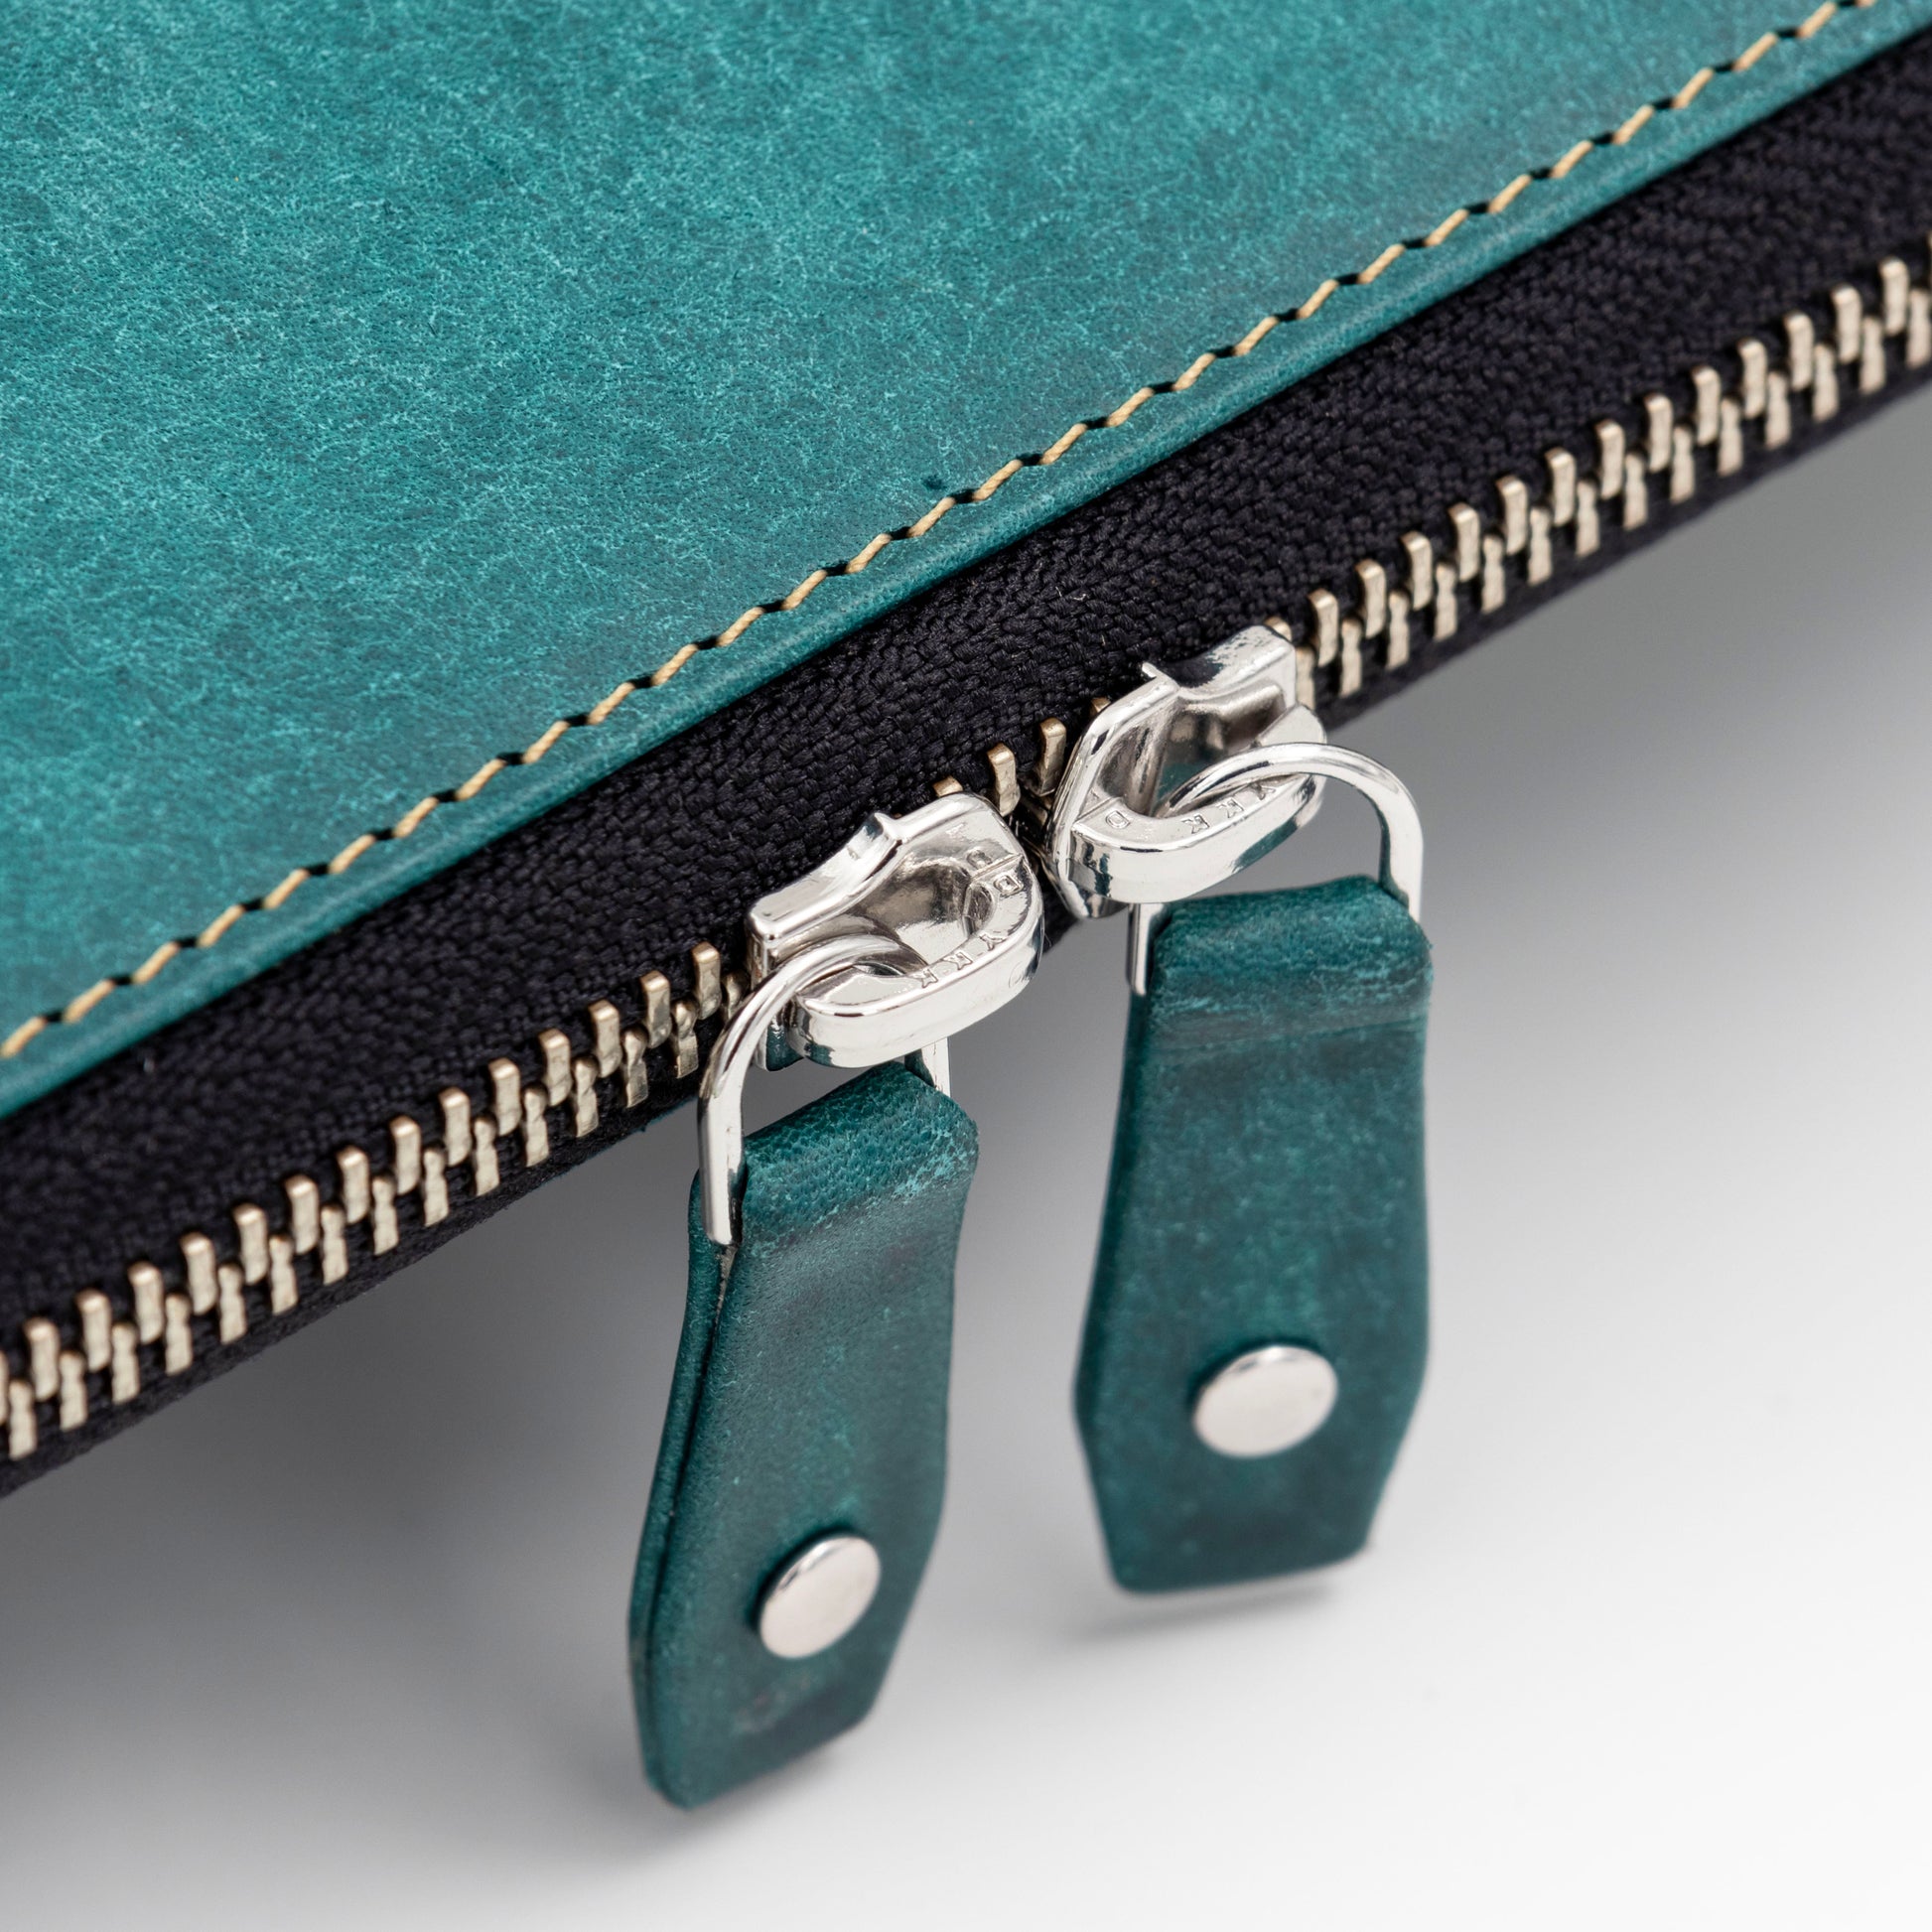 The laptop case is designed with YKK Zippers that are made to last.